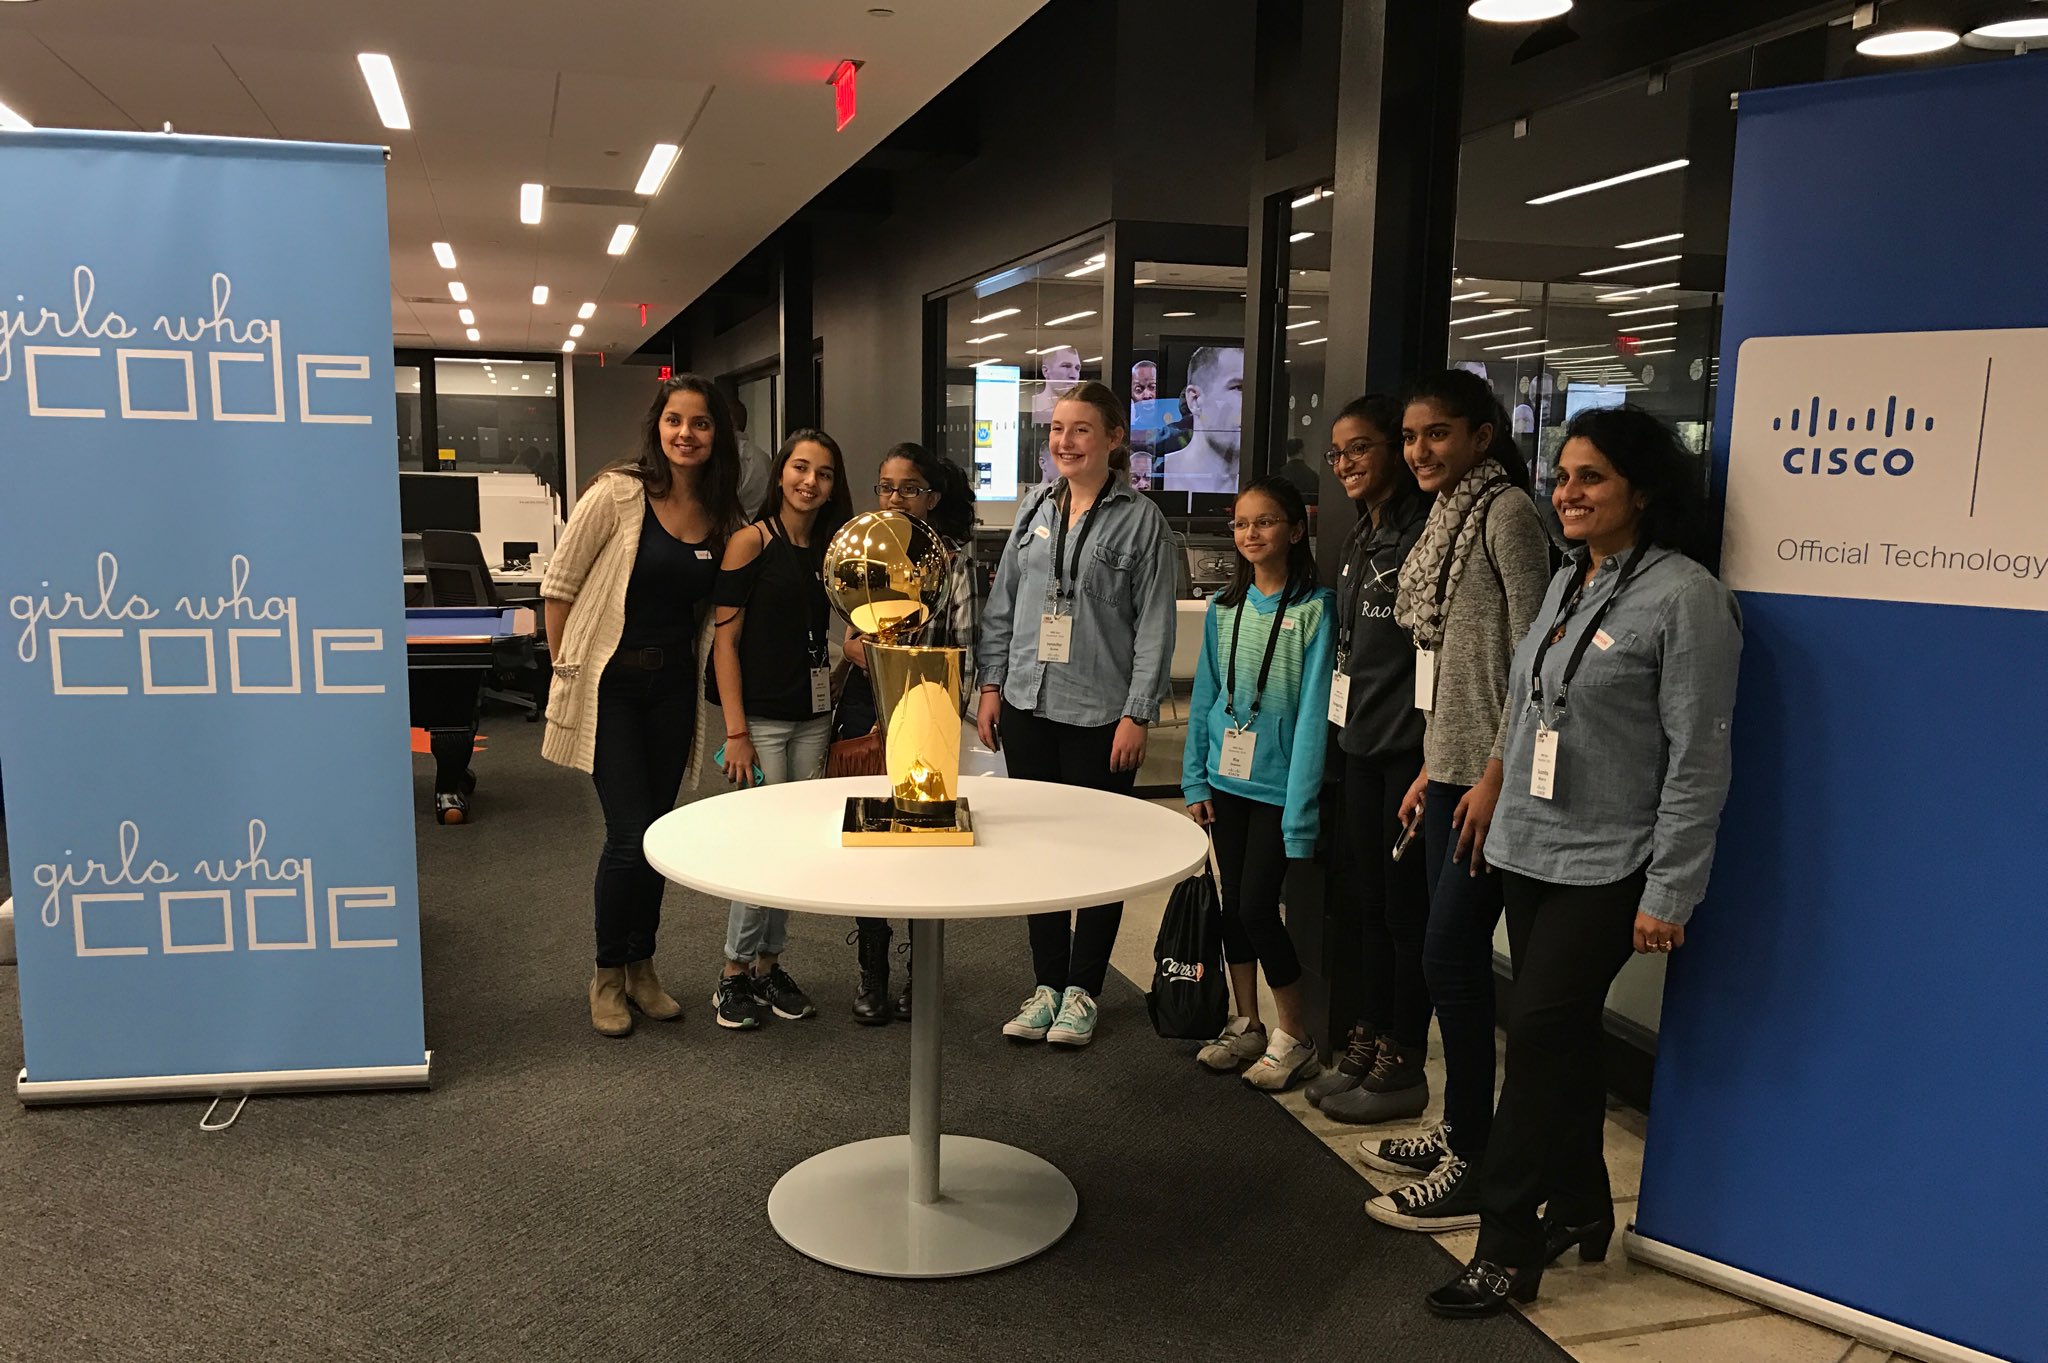 NBA sur X : Today at our NBAE office in Secaucus, we're hosting @Cisco  @GirlsWhoCode Career Panel with @kstokes41, @felipelopez13dr & #NBA  staff!  / X